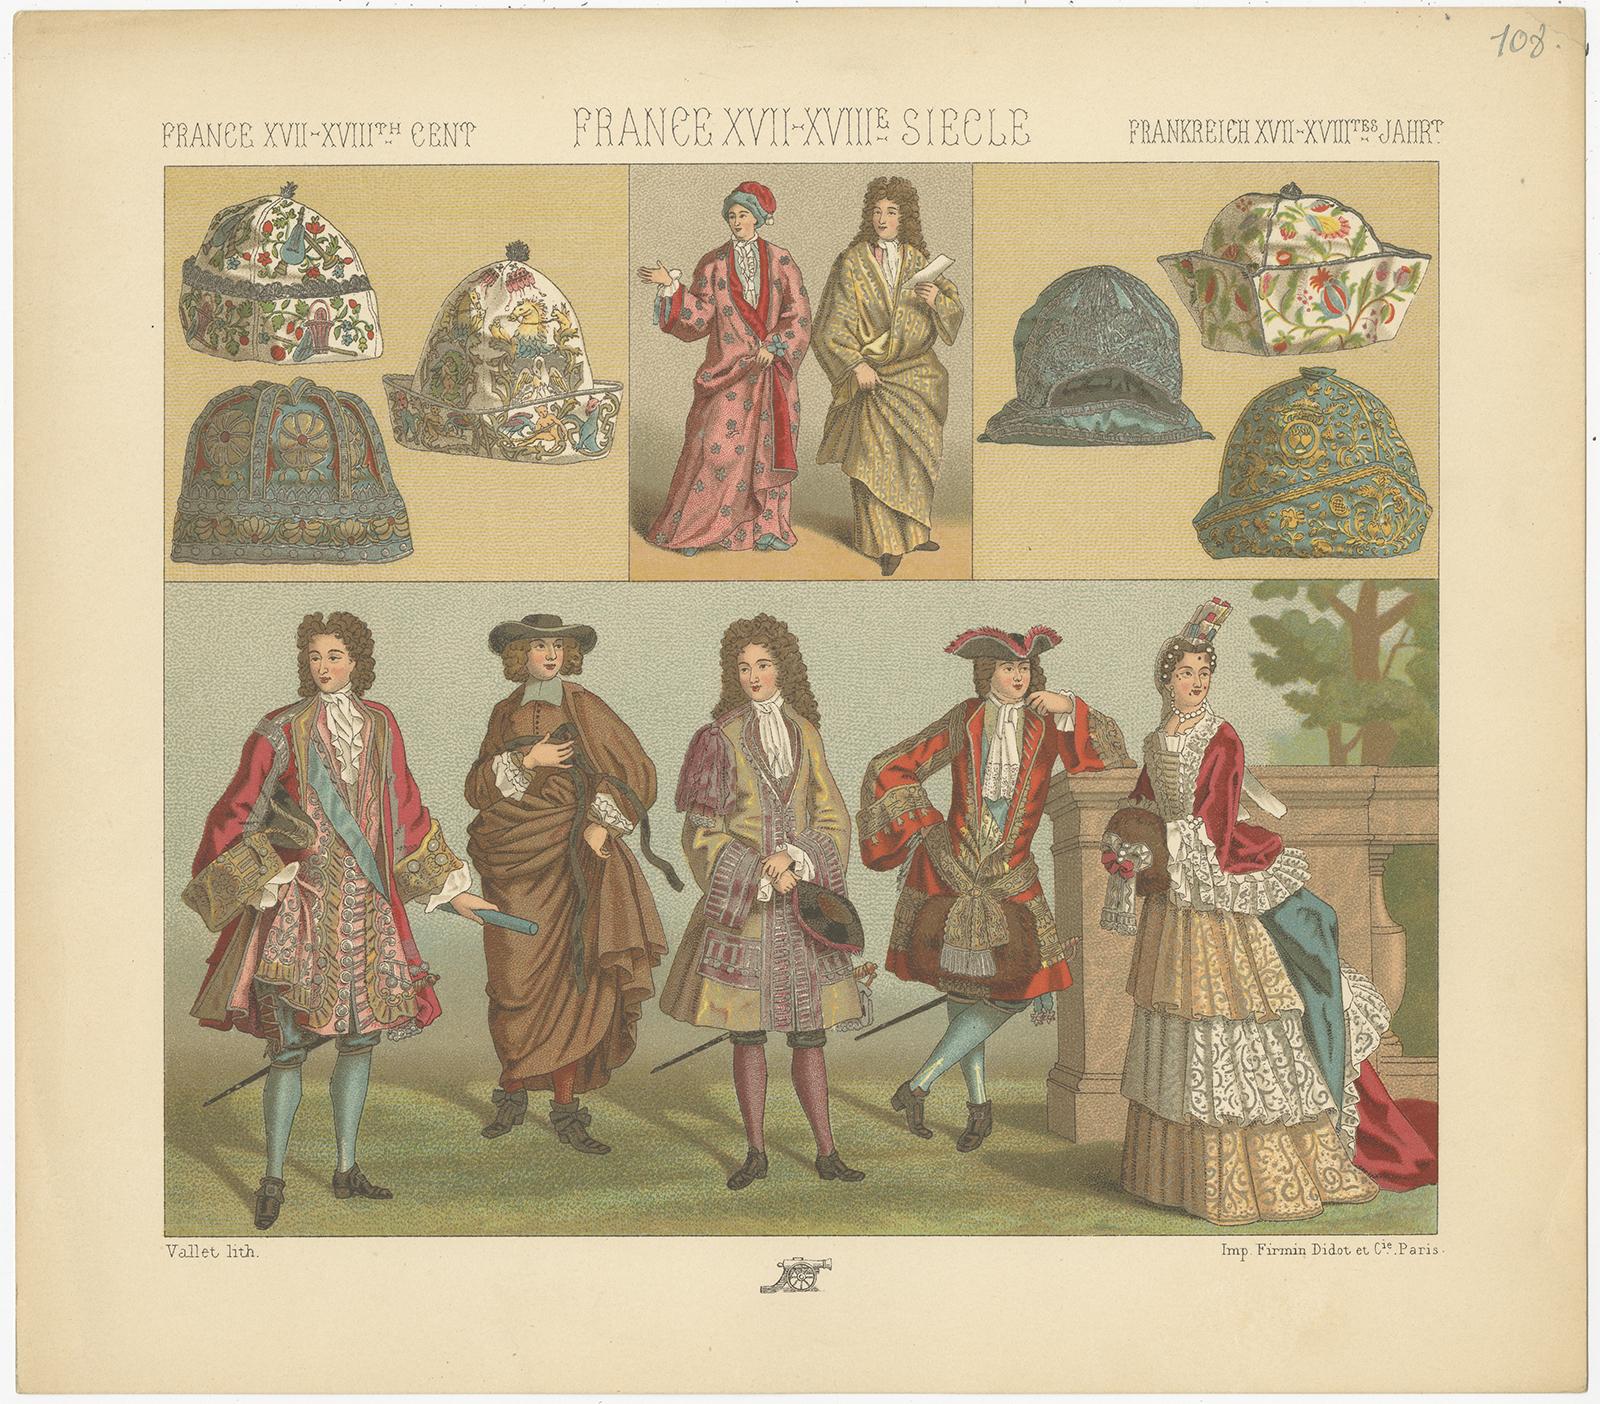 Antique print titled 'France XVII, XVIIIth Cent - France XVII, XVIIIe Siecle - Frankreich XVII, XVIIItes Jahr'. Chromolithograph of French 17th-18th century costumes. This print originates from 'Le Costume Historique' by M.A. Racinet. Published